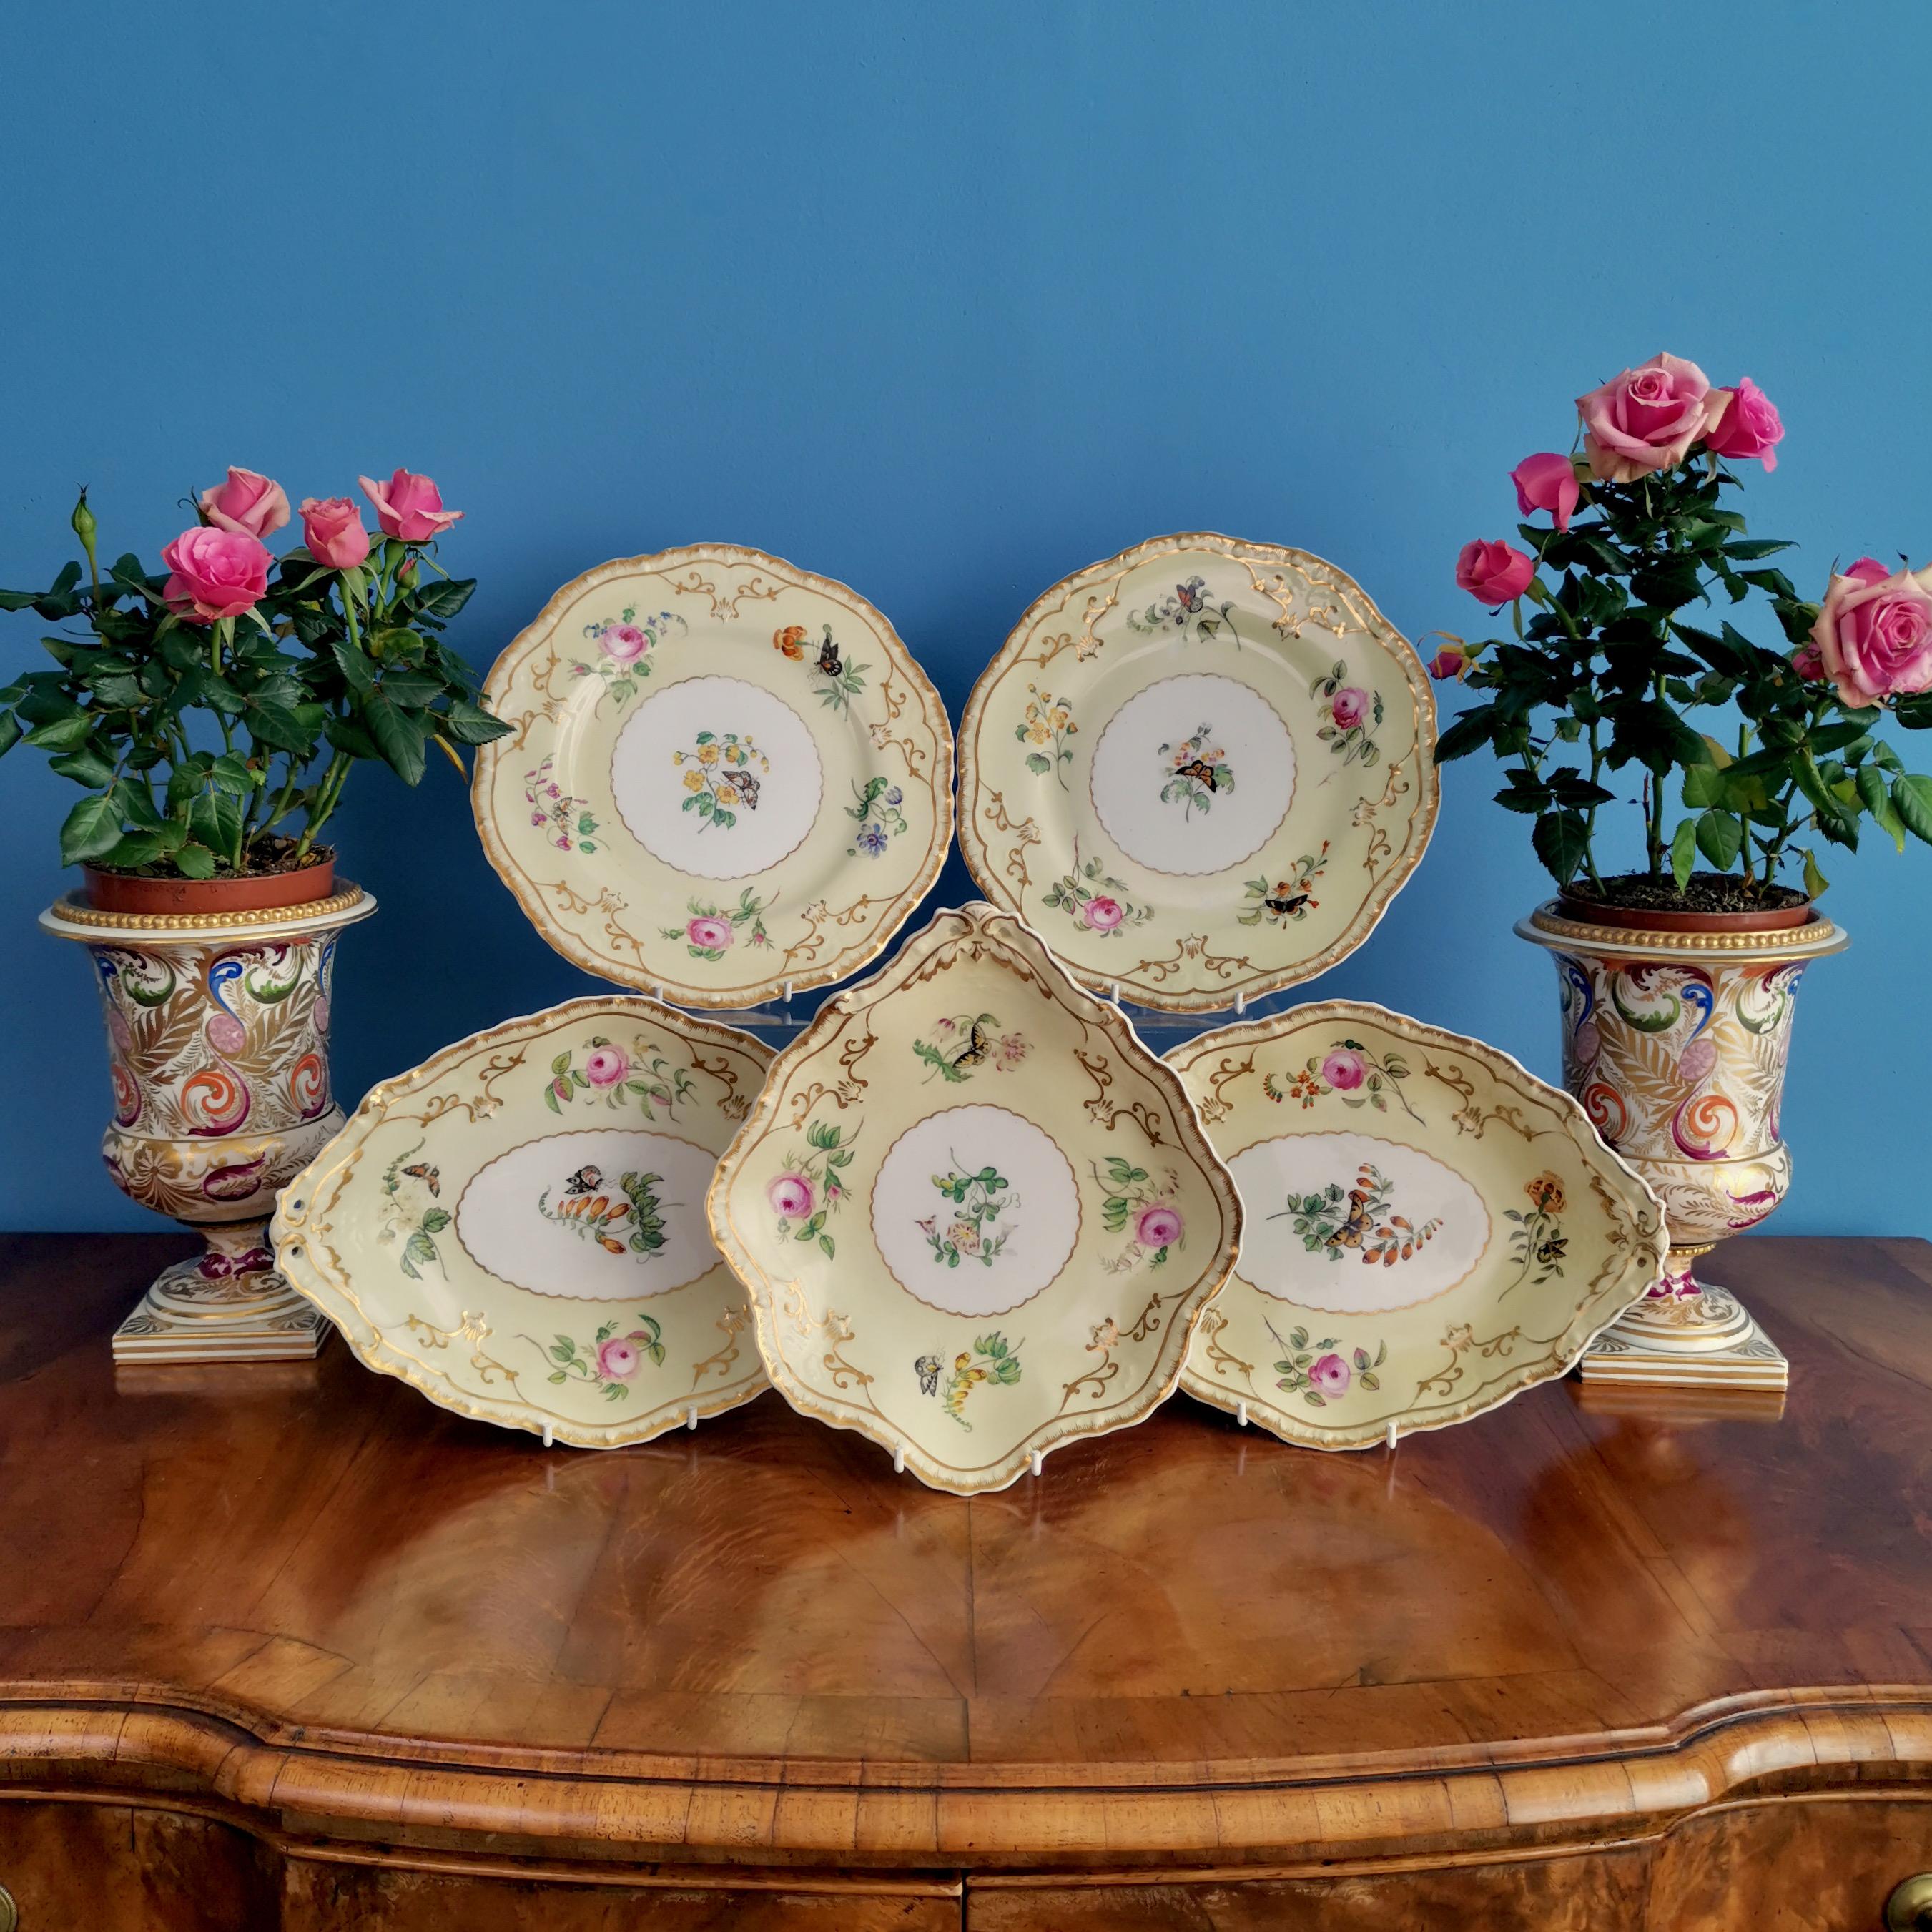 This is a very charming set of dessert plates made by Copeland & Garrett between 1833 and 1847, which was the Rococo Revival era. The service is made of Felspar porcelain and decorated in yellow with flowers and butterflies. The service consists of